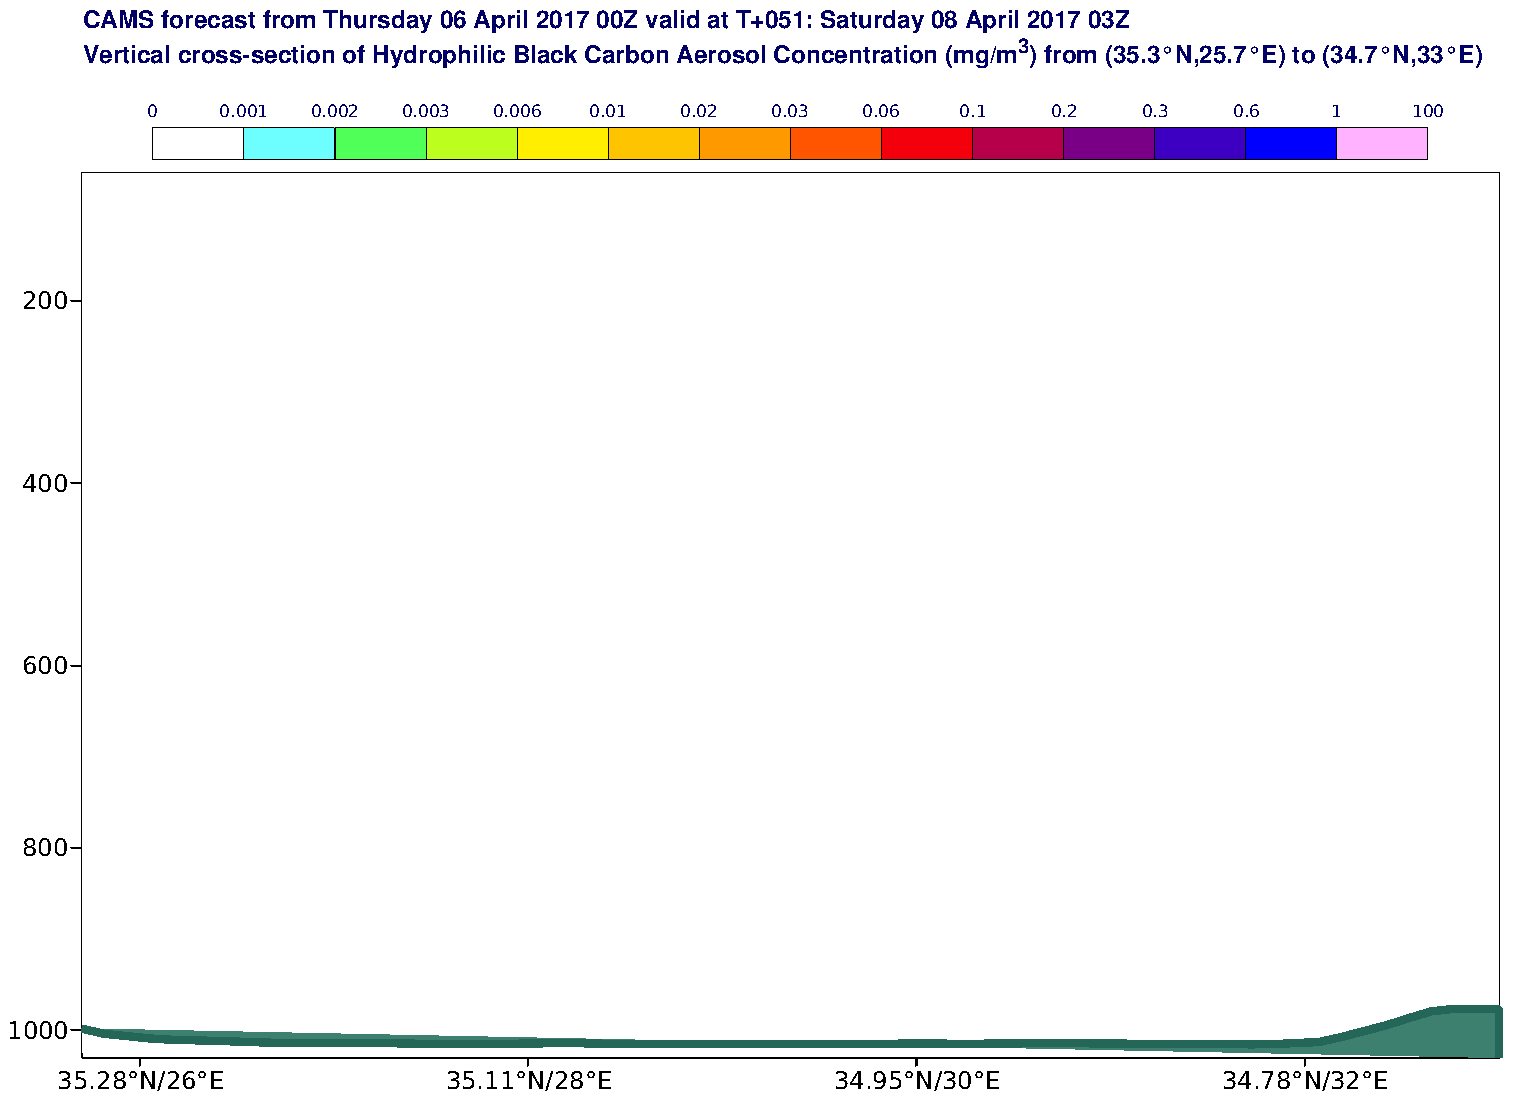 Vertical cross-section of Hydrophilic Black Carbon Aerosol Concentration (mg/m3) valid at T51 - 2017-04-08 03:00